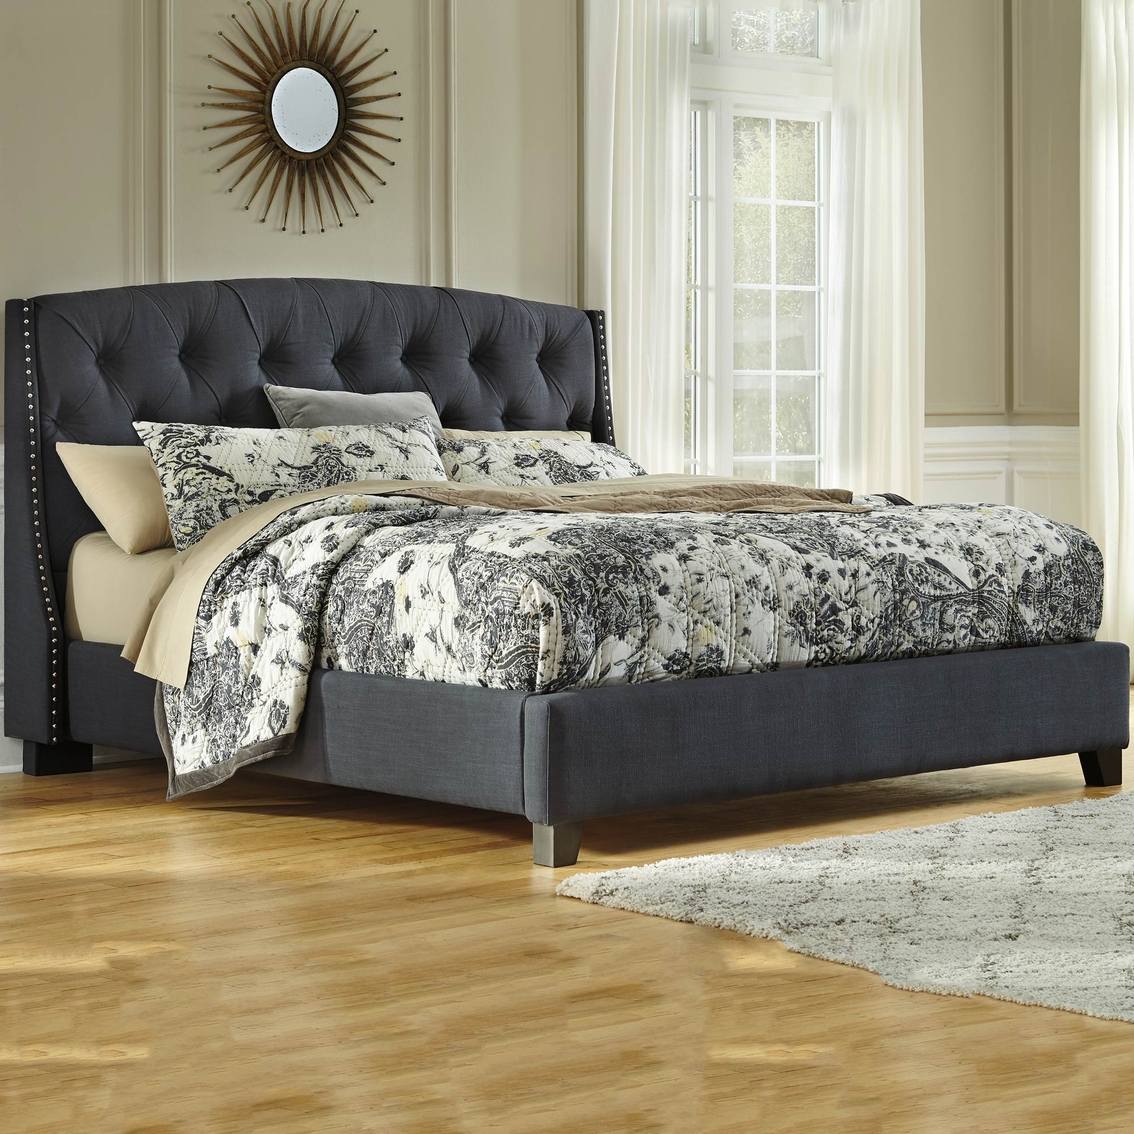 Ashley Kasidon Queen Tufted Upholstered Bed - Image 2 of 2